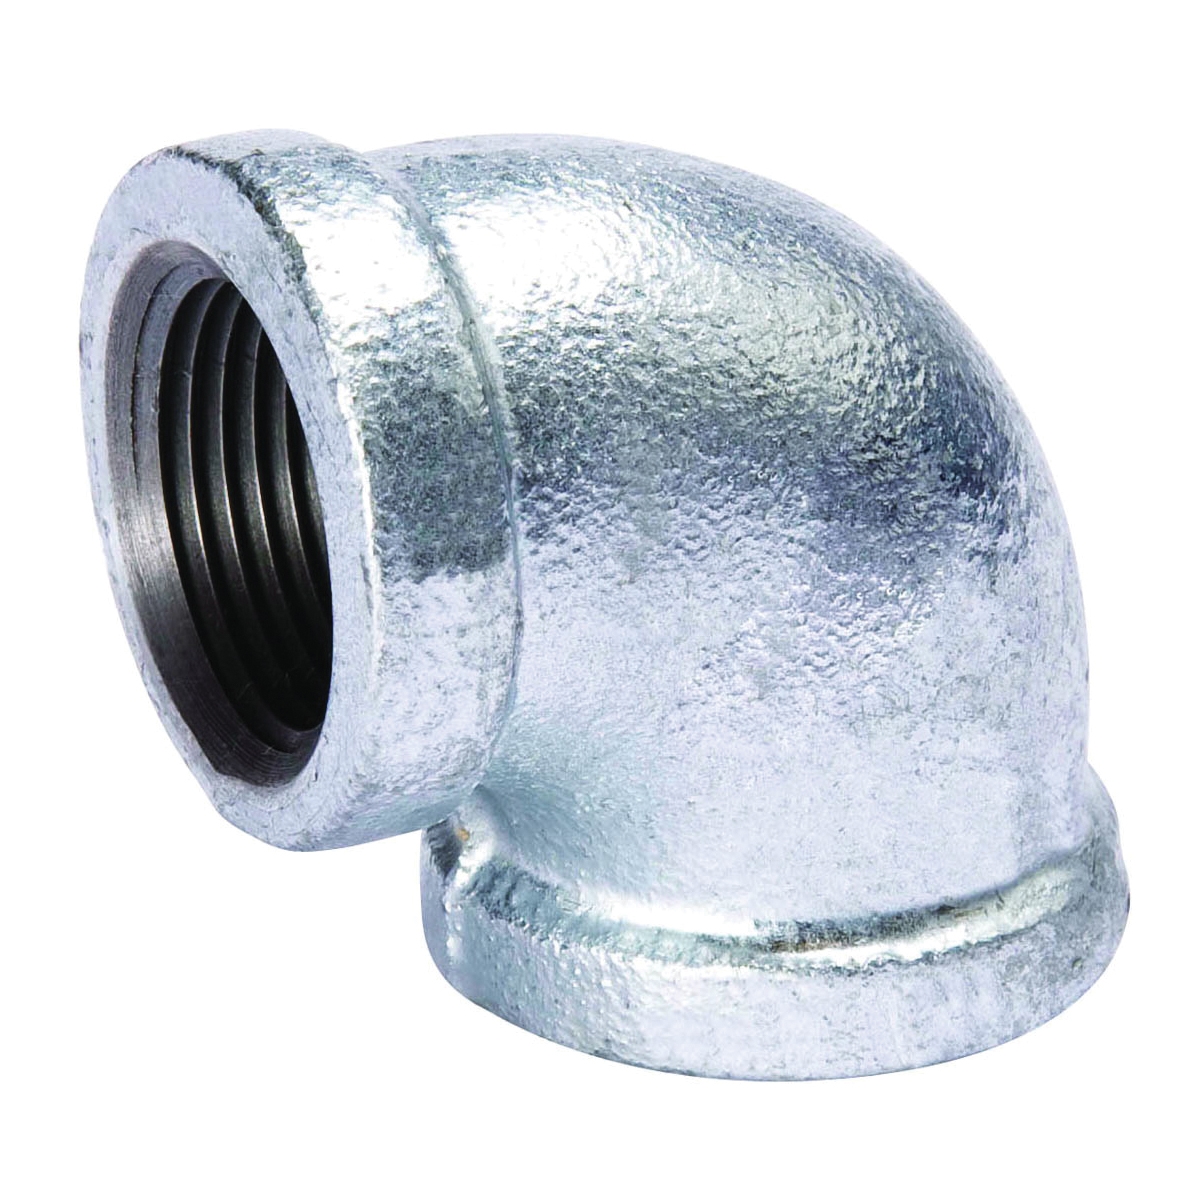 510-011BC Pipe Elbow, 4 in, Threaded, 90 deg Angle, 300 psi Pressure